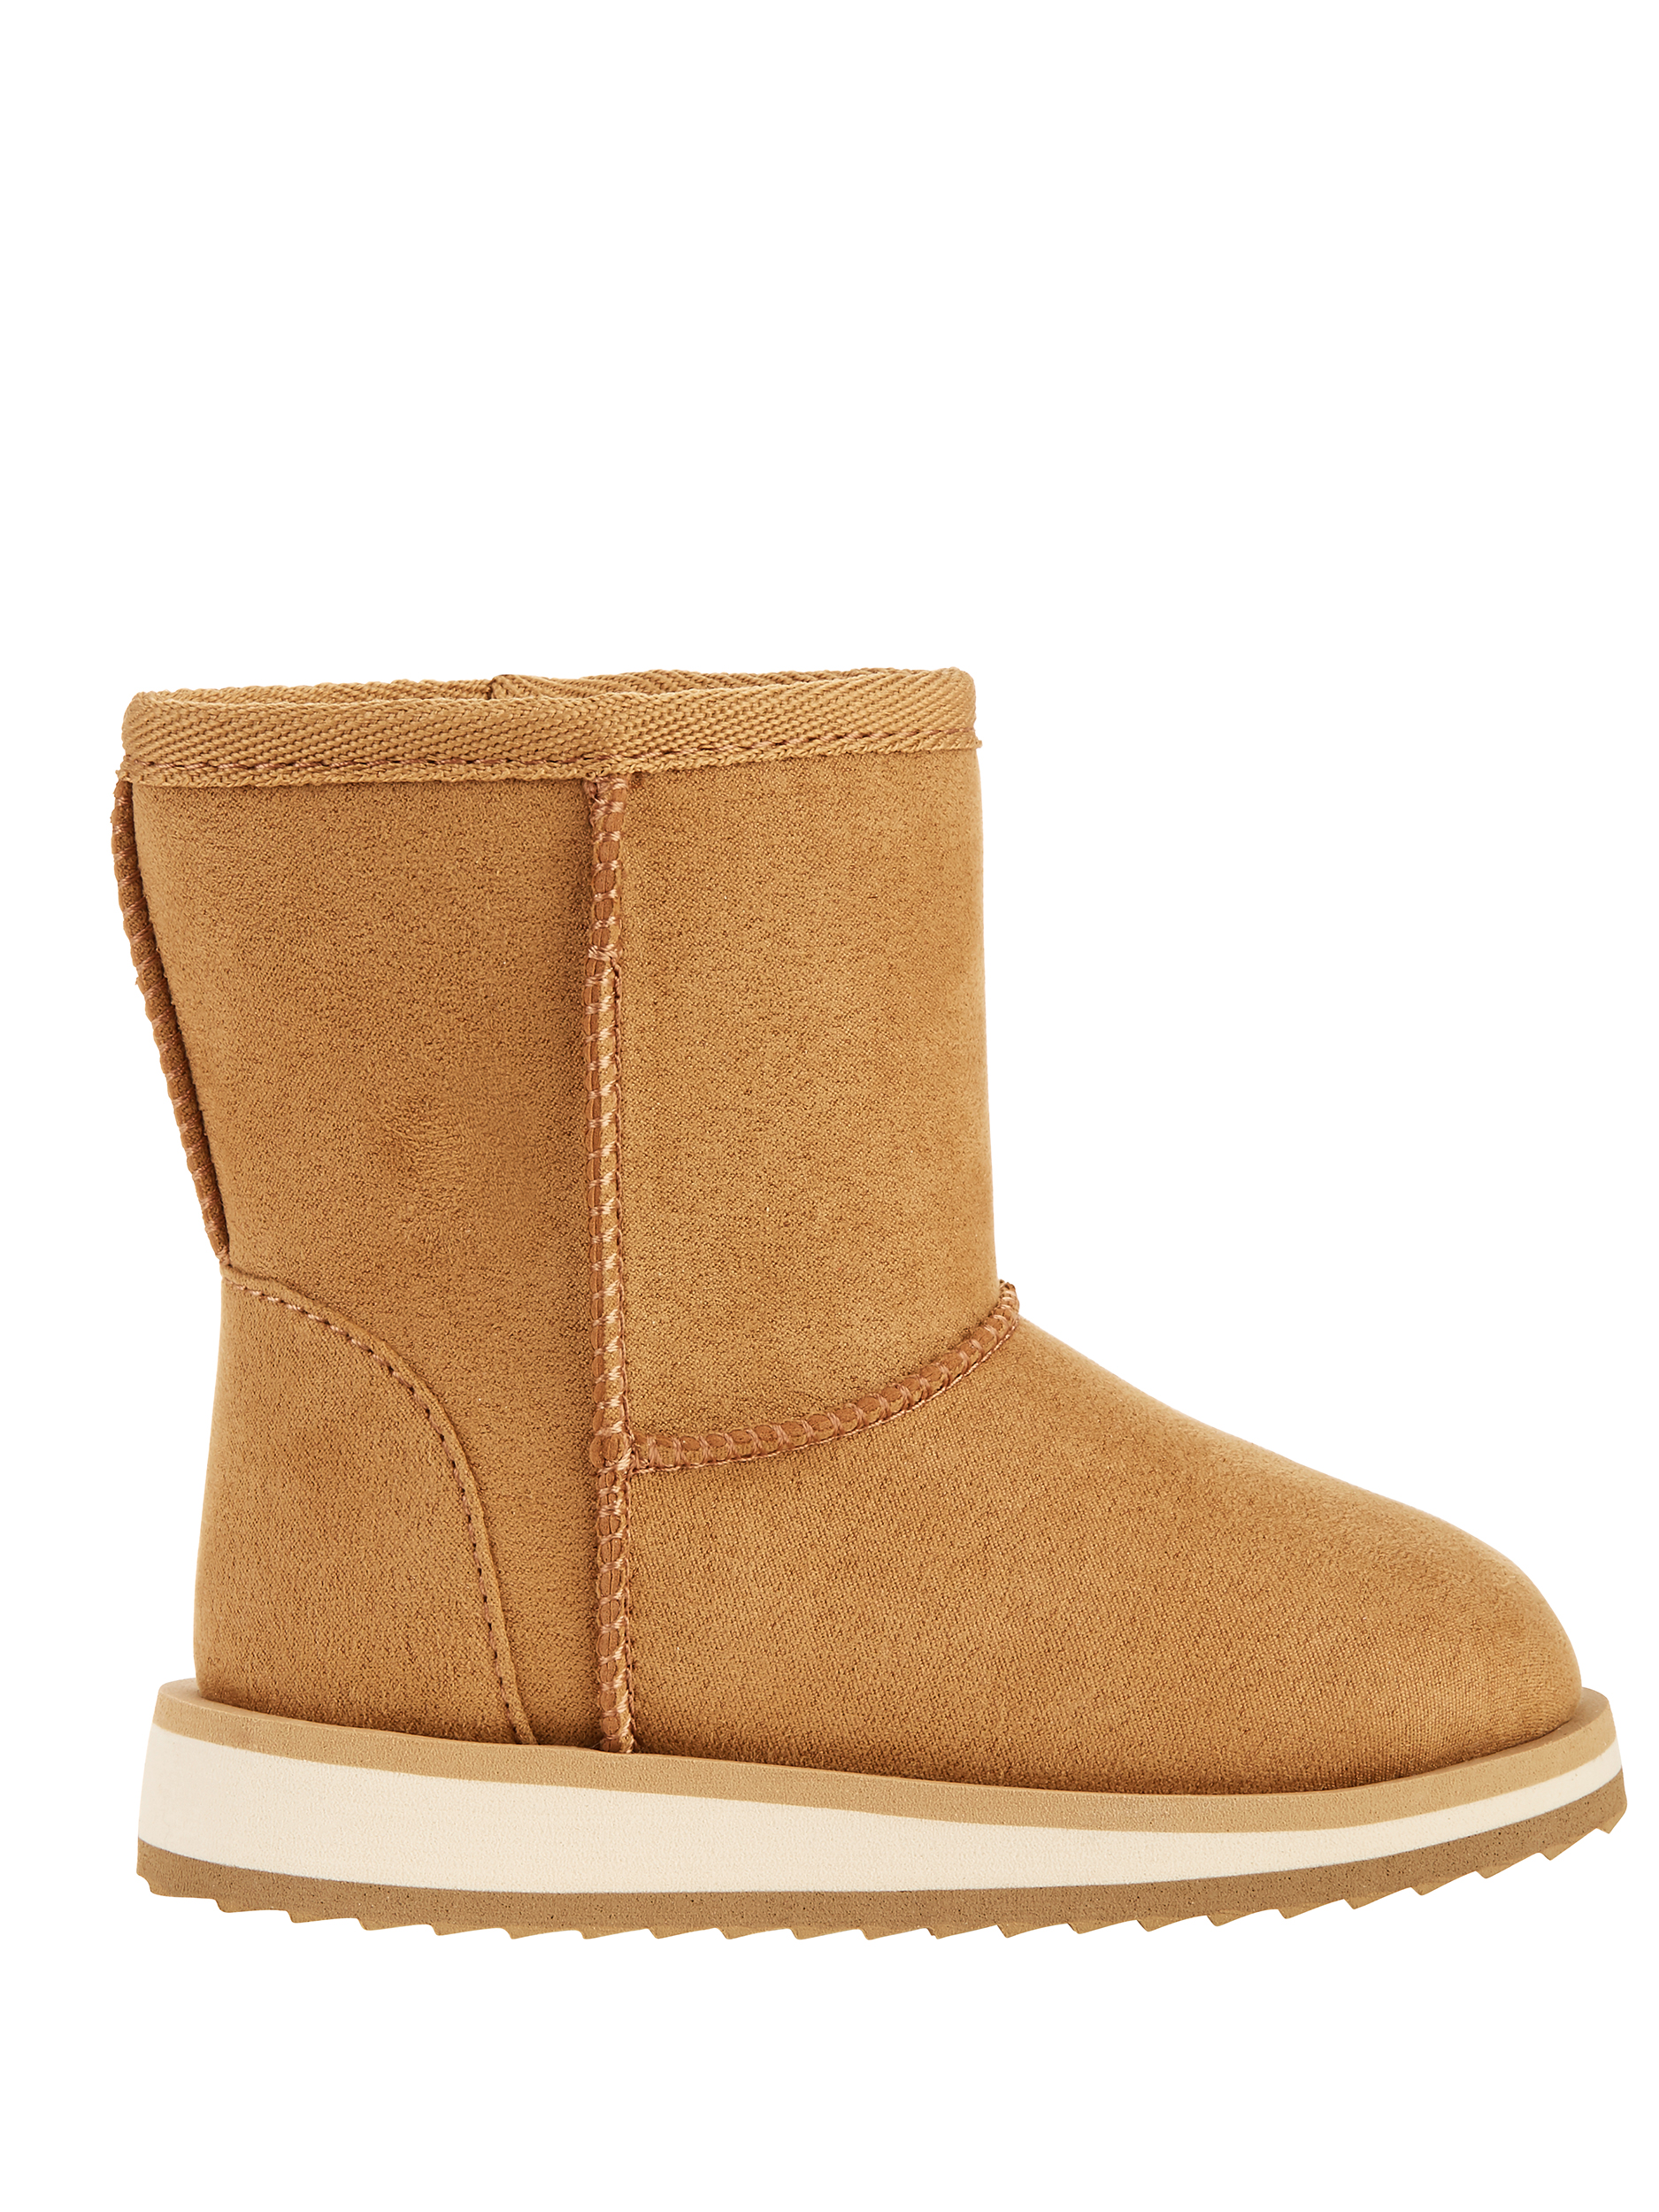 Wonder Nation Faux Shearling Boots (Toddler Girls) - image 5 of 6